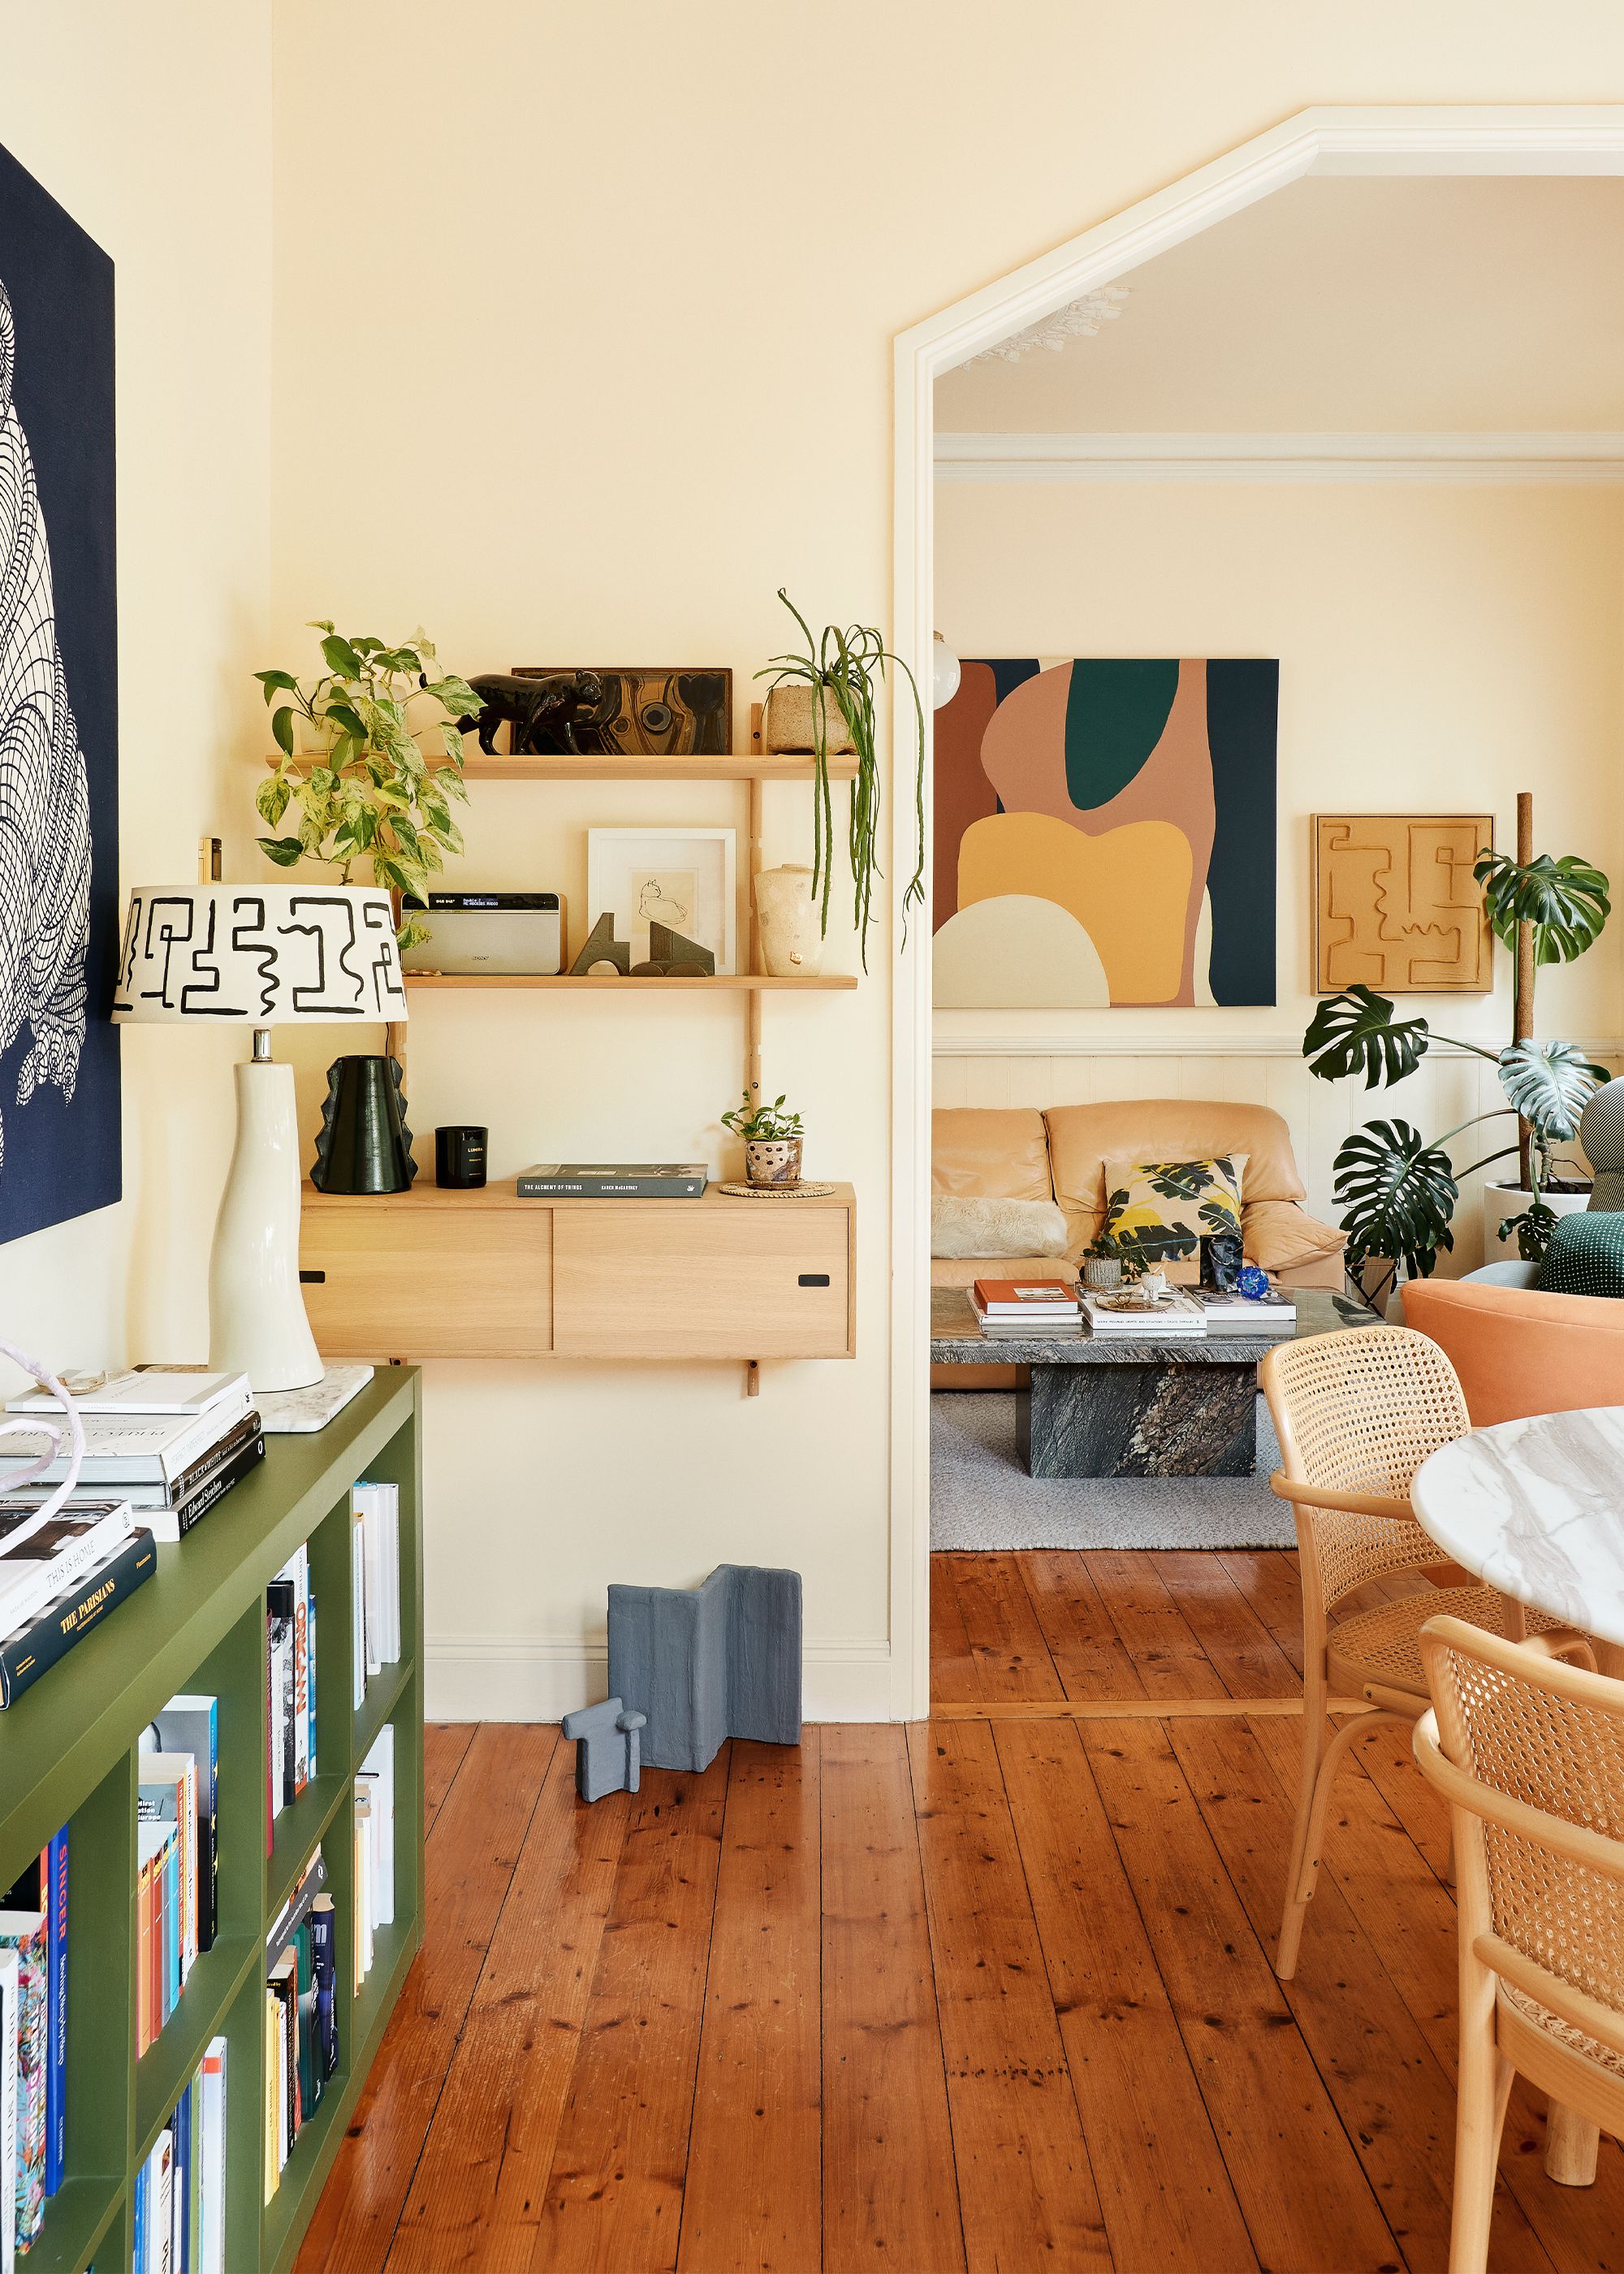 How Designer Sarah Shinners Turned a 'Beige' Rental Into a Maximalist ...